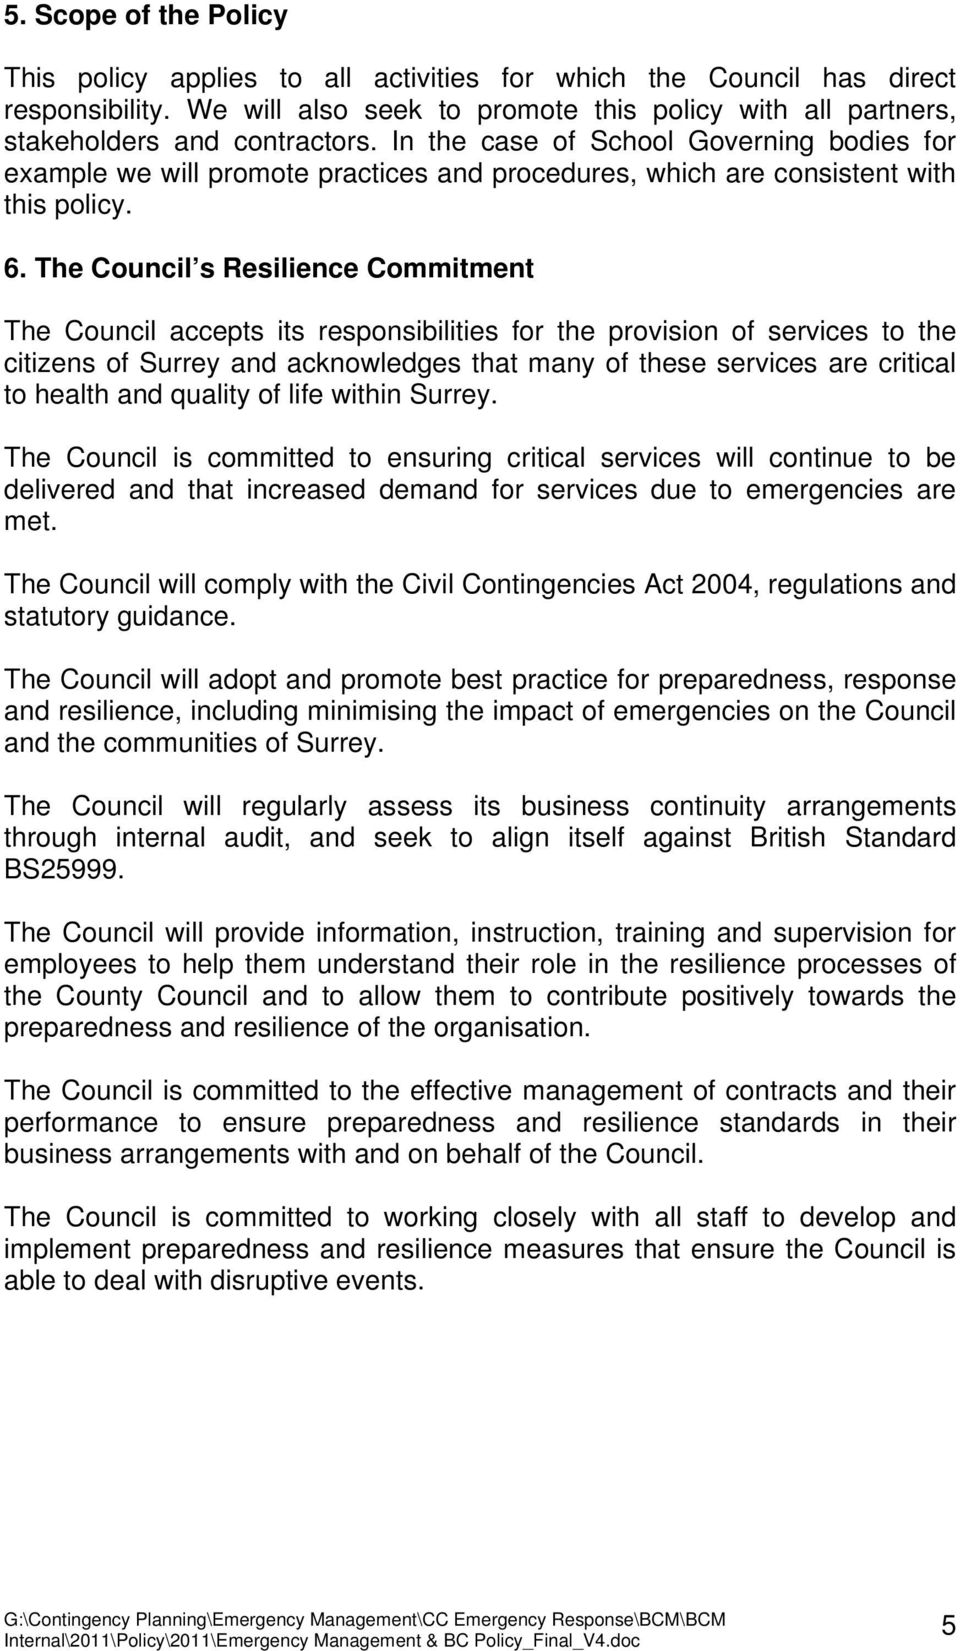 The Council s Resilience Commitment The Council accepts its responsibilities for the provision of services to the citizens of Surrey and acknowledges that many of these services are critical to